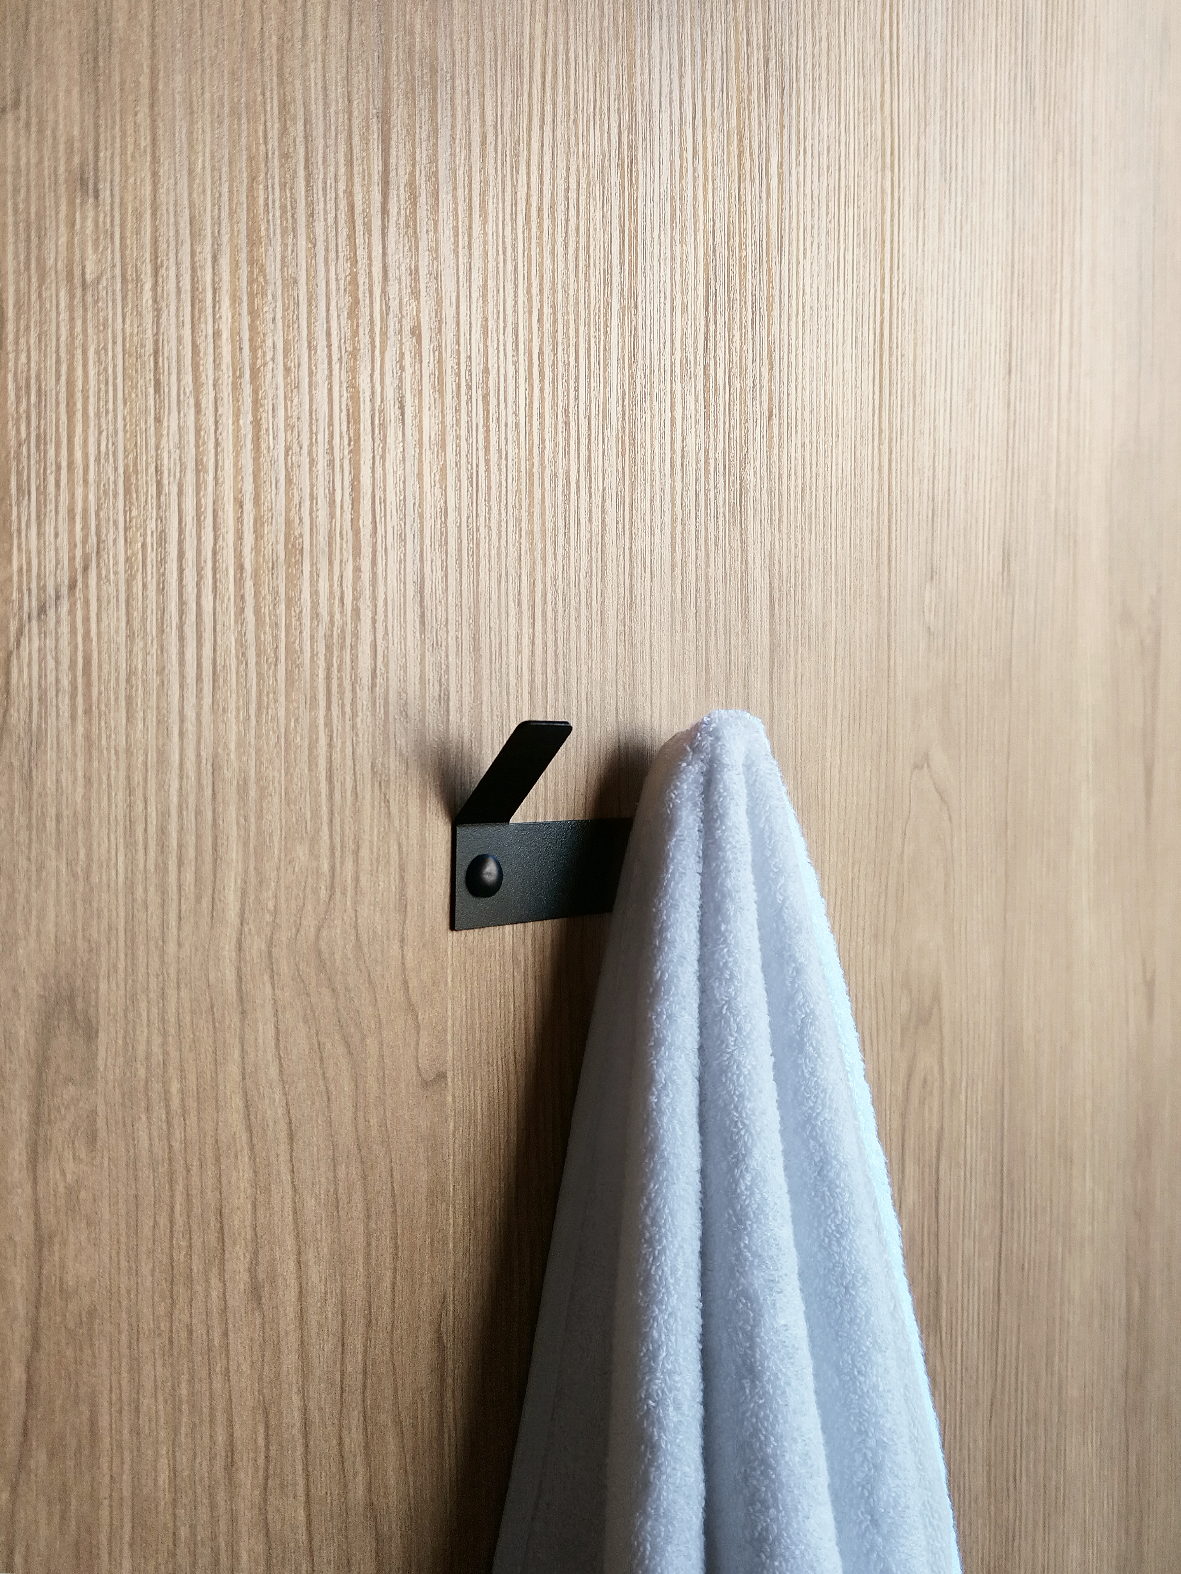 DOUBLE WALL HOOK / Black & white wall hooks by LOCI